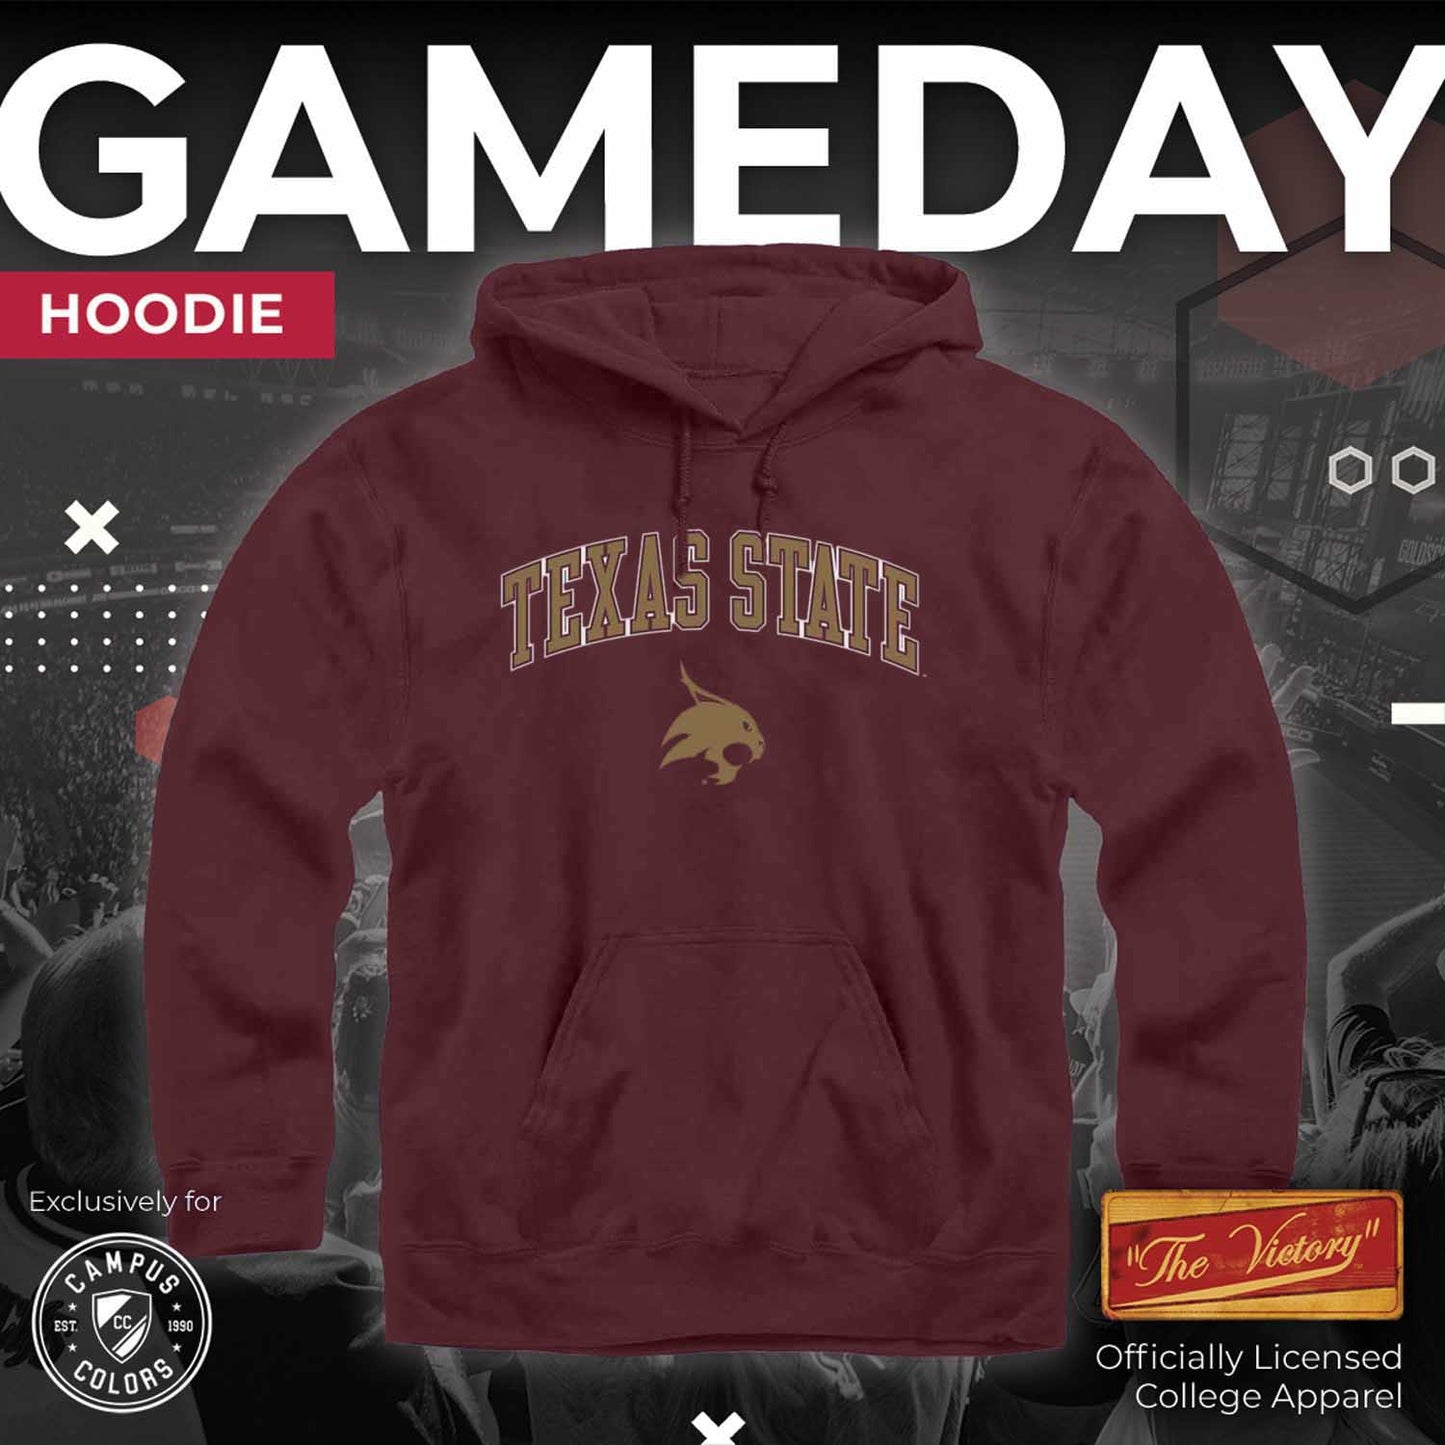 Texas State Bobcats Adult Arch & Logo Soft Style Gameday Hooded Sweatshirt - Maroon